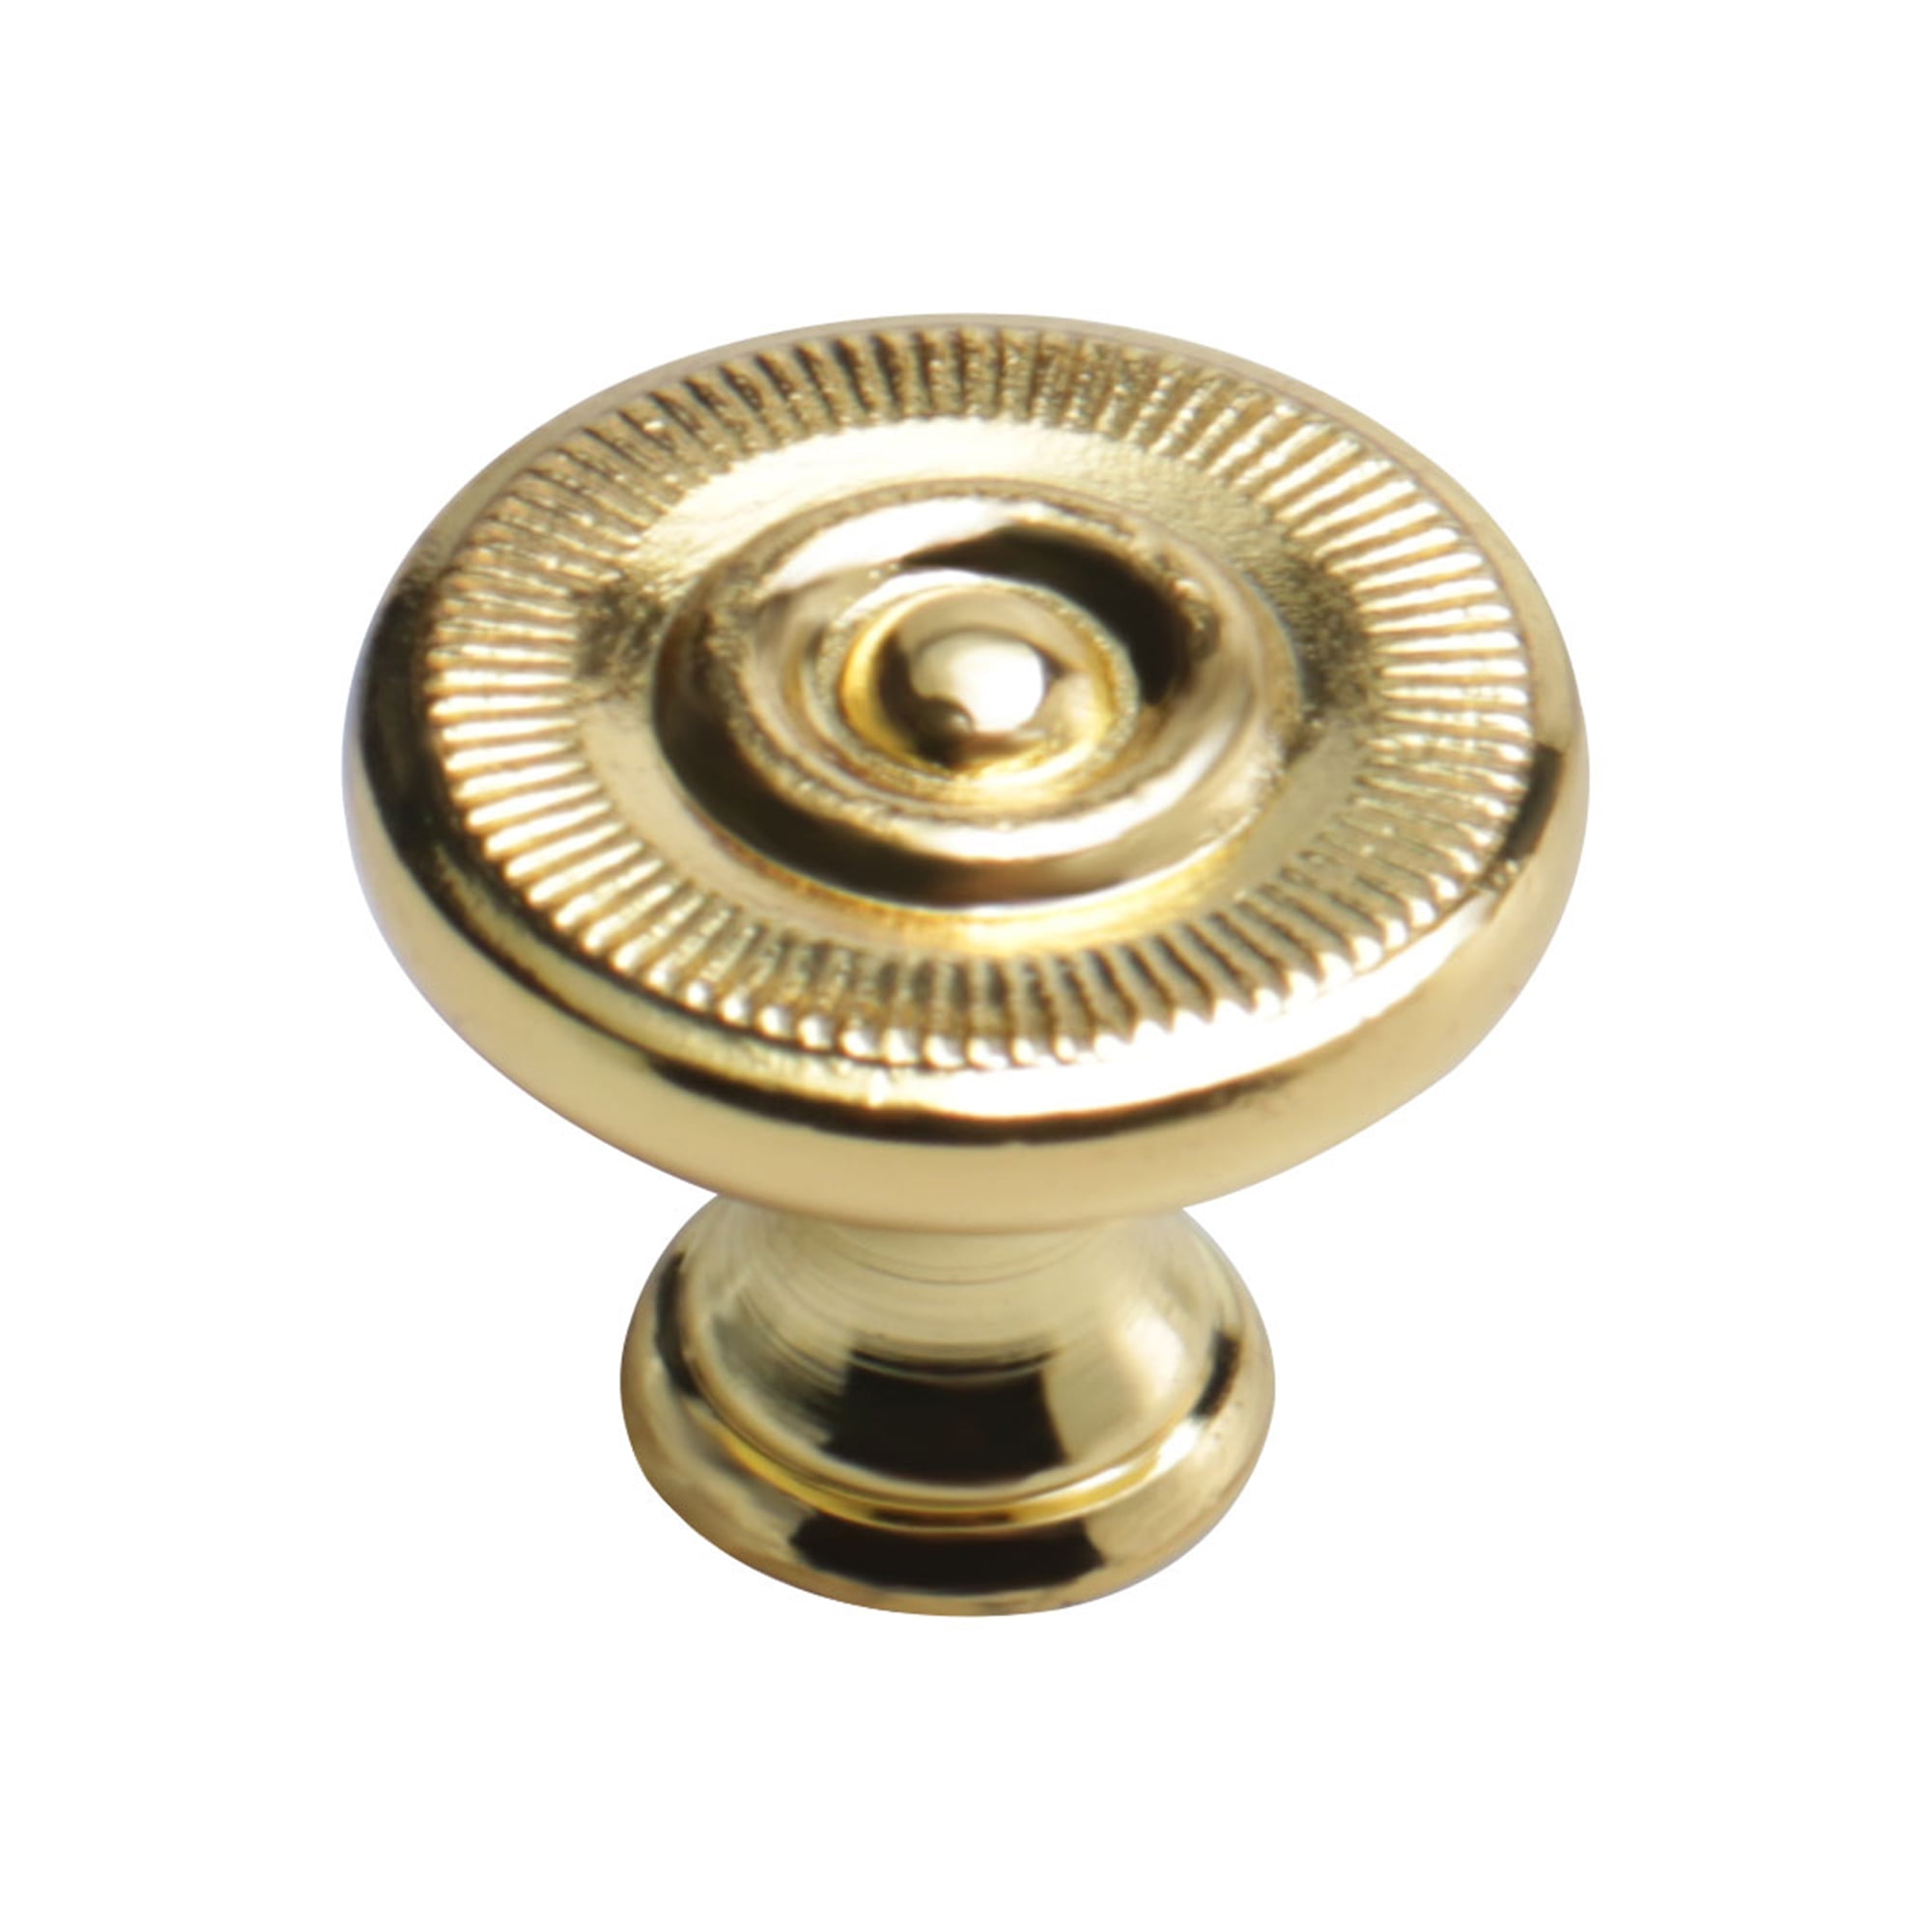 These Please Longer Bolt 90mm for fixing ceramic knobs to thicker doors drawers 